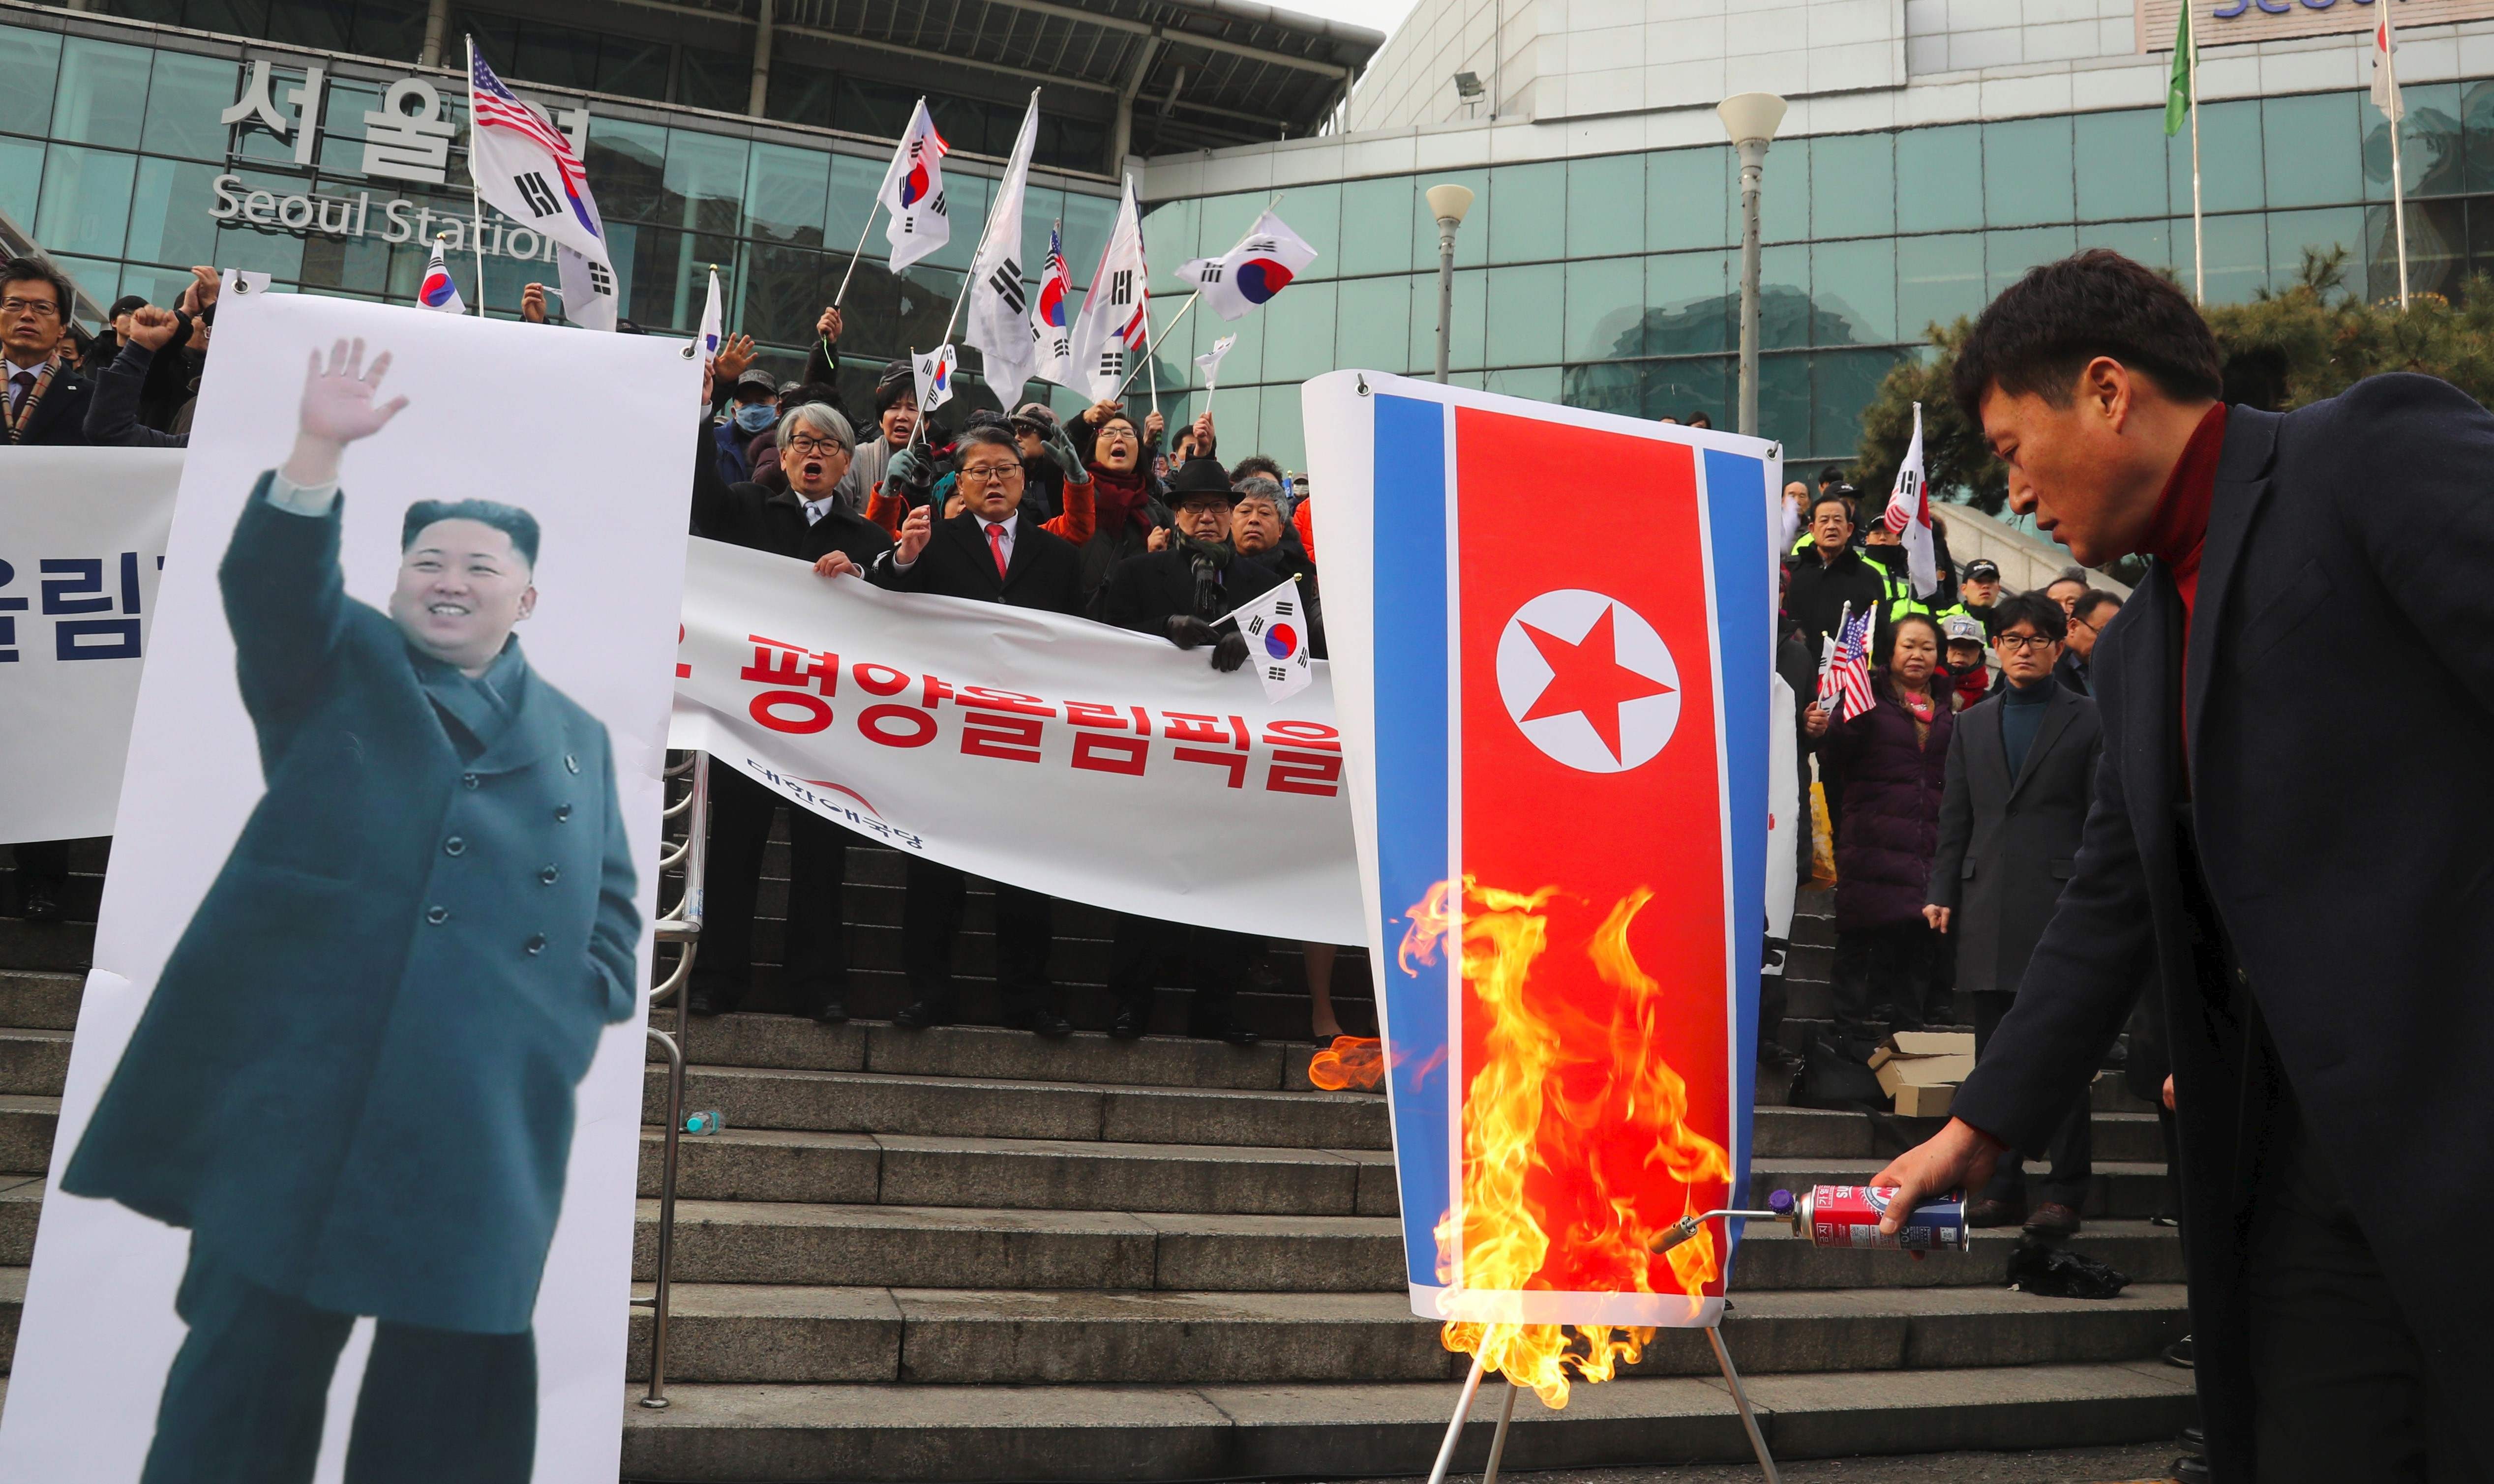 South Korean protesters burn a North Korean flag and a picture of North Korean leader Kim Jong-un during an anti-North Korea rally outside Seoul Station on January 22 as a North Korean delegation arrives. Photo: AFP/Yonhap